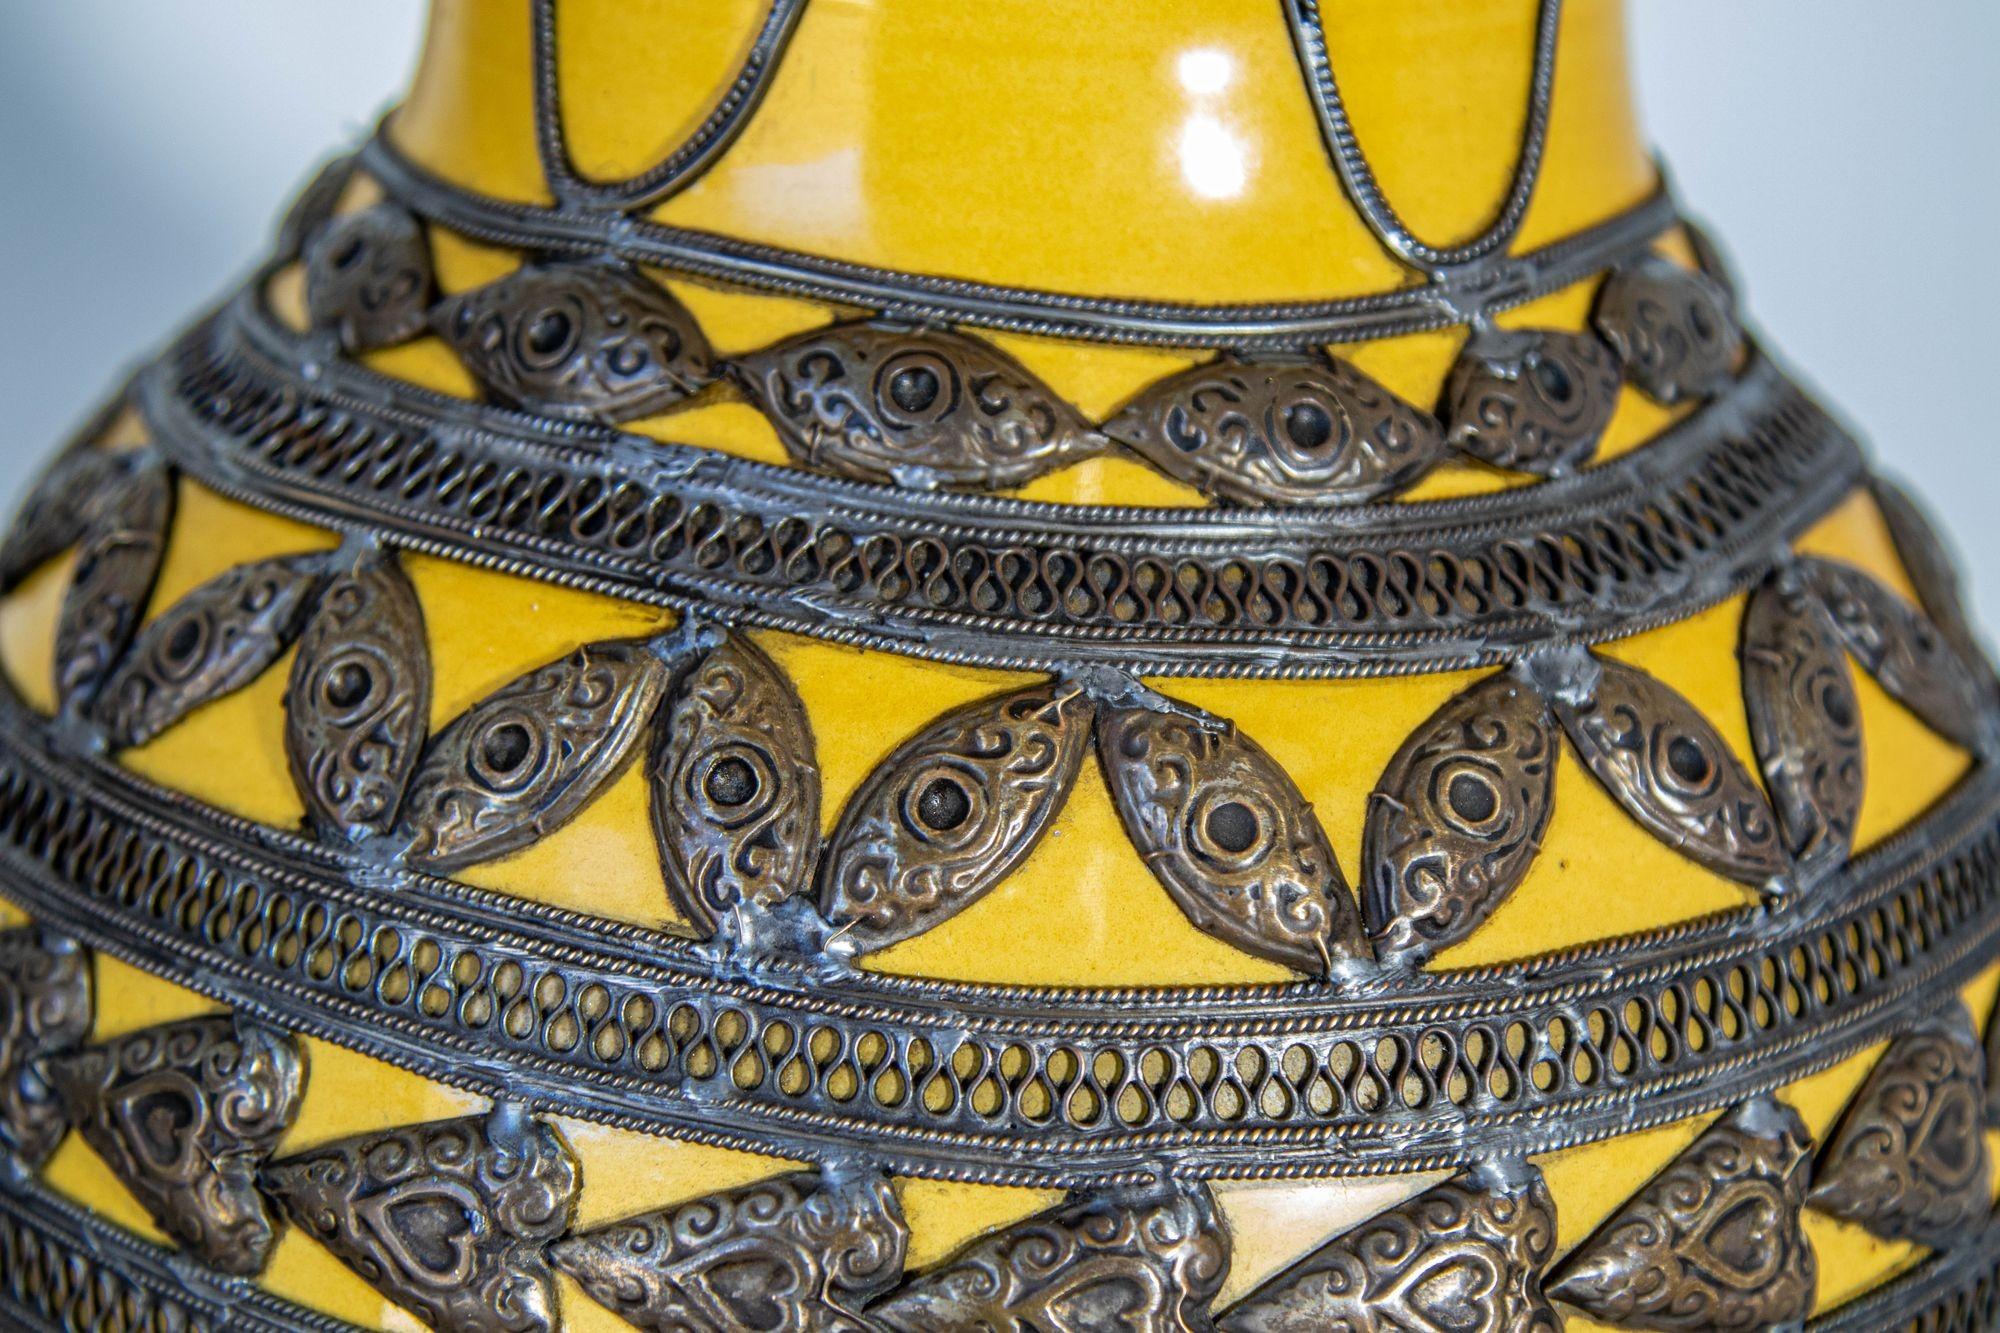 Antique Moroccan Ceramic Vase Bright Yellow with Metal Moorish Filigree overlaid In Good Condition For Sale In North Hollywood, CA